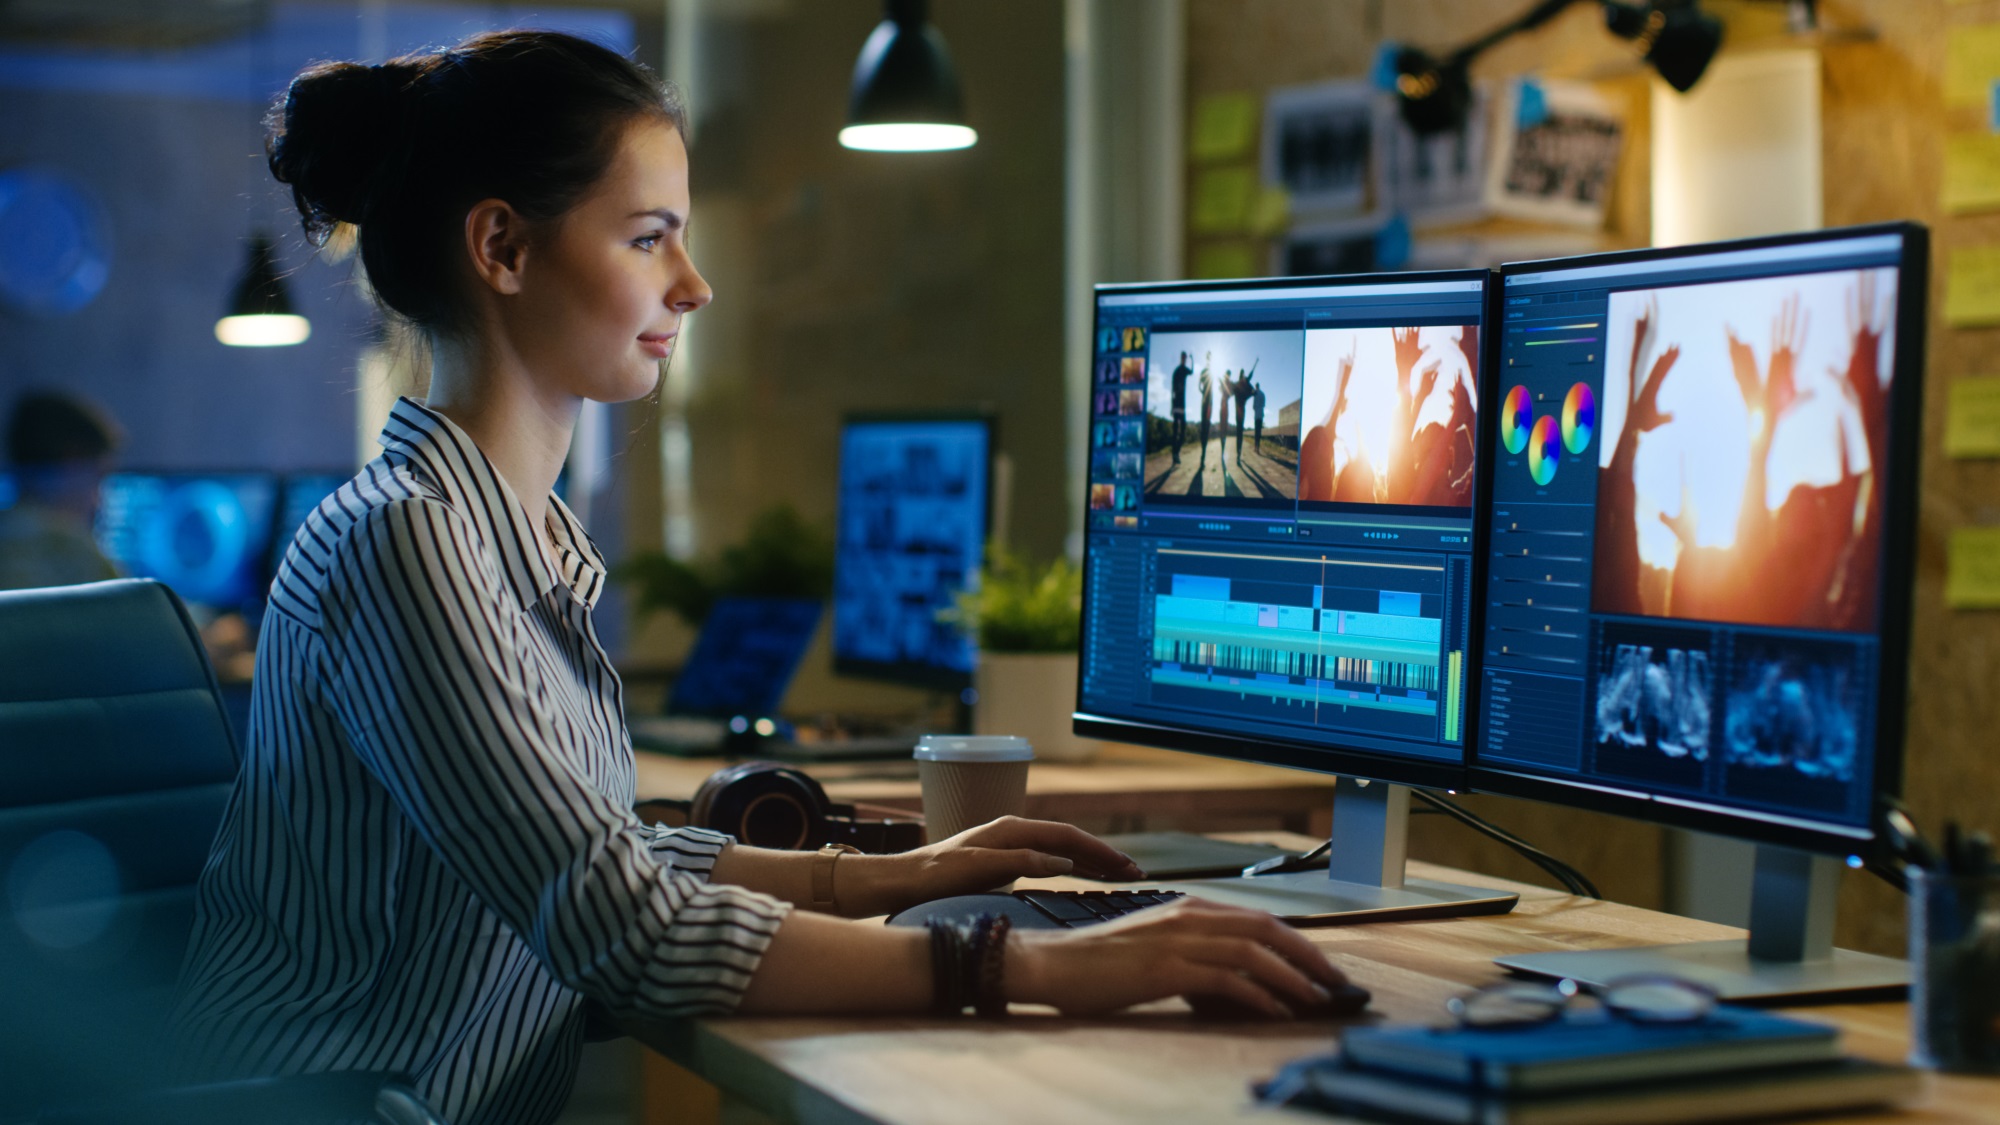 5 Advantages of Using an Online Video Editor